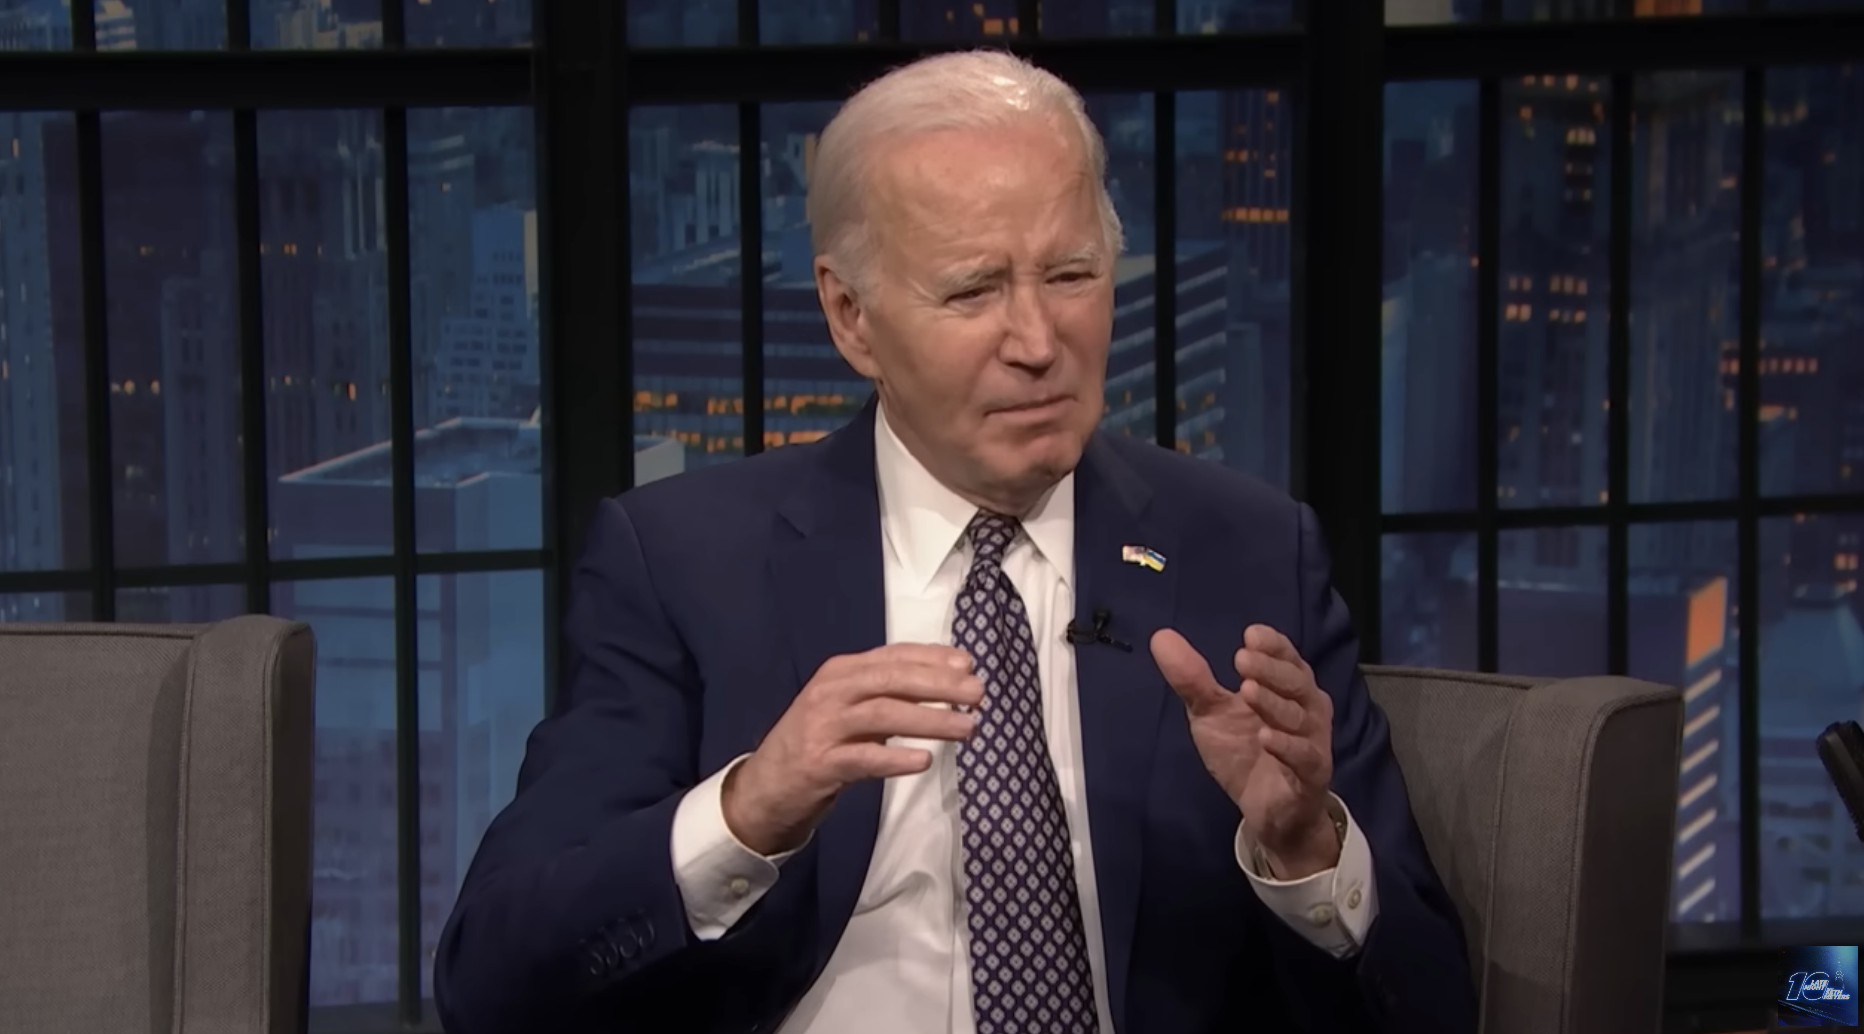 Joe Biden seated, gesturing while speaking, wearing a suit and tie, on a talk show set